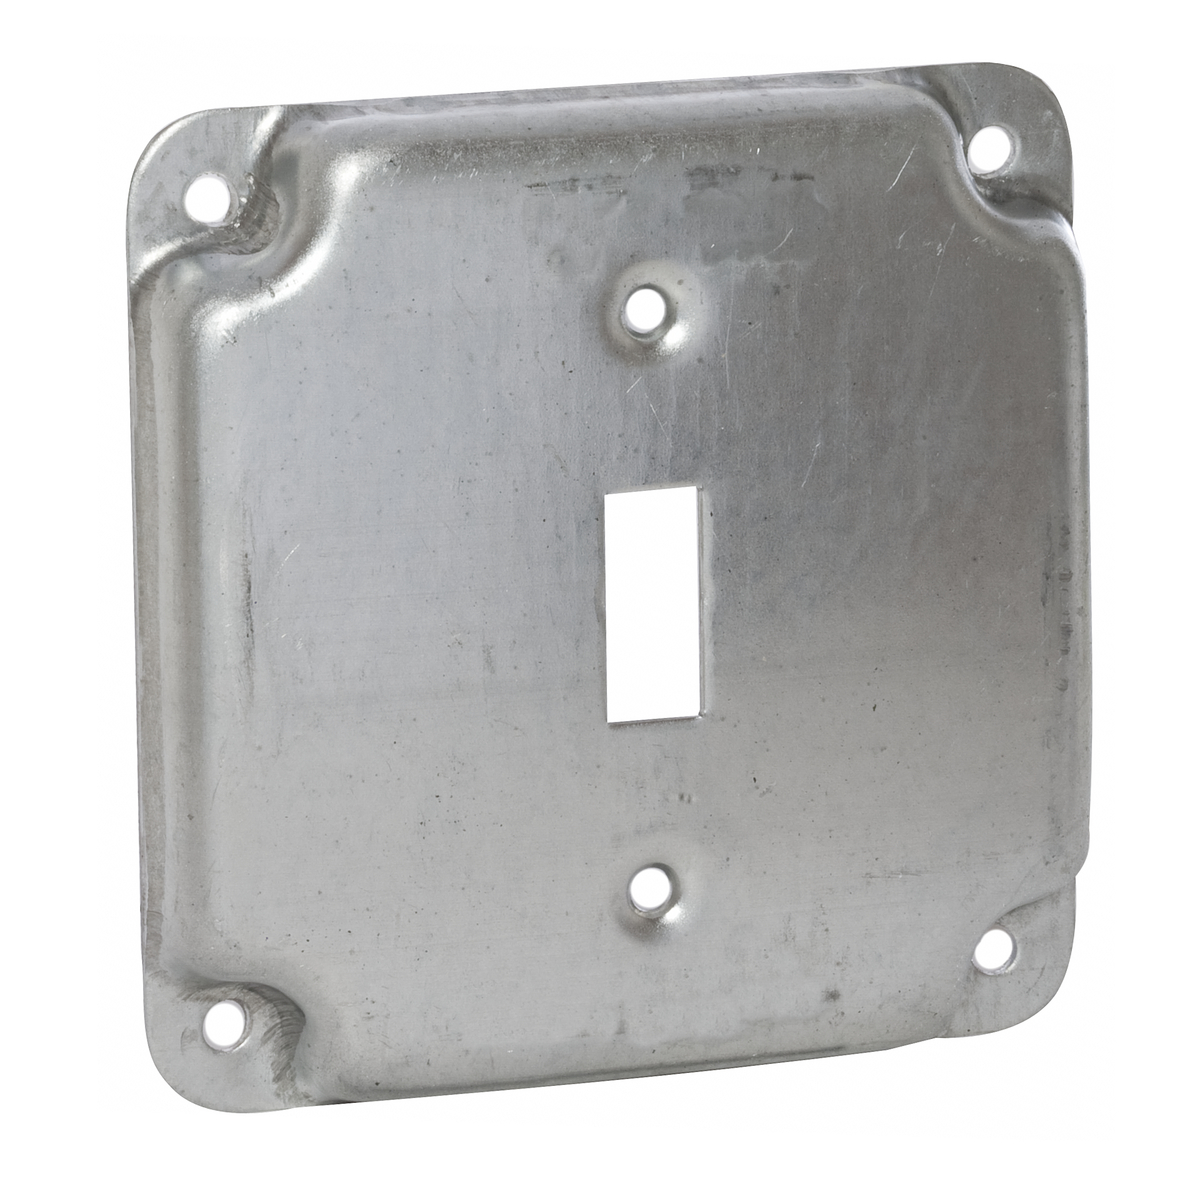 RACO 800C 4" SQUARE EXPOSED WORK COVER, 1 TOGGLE